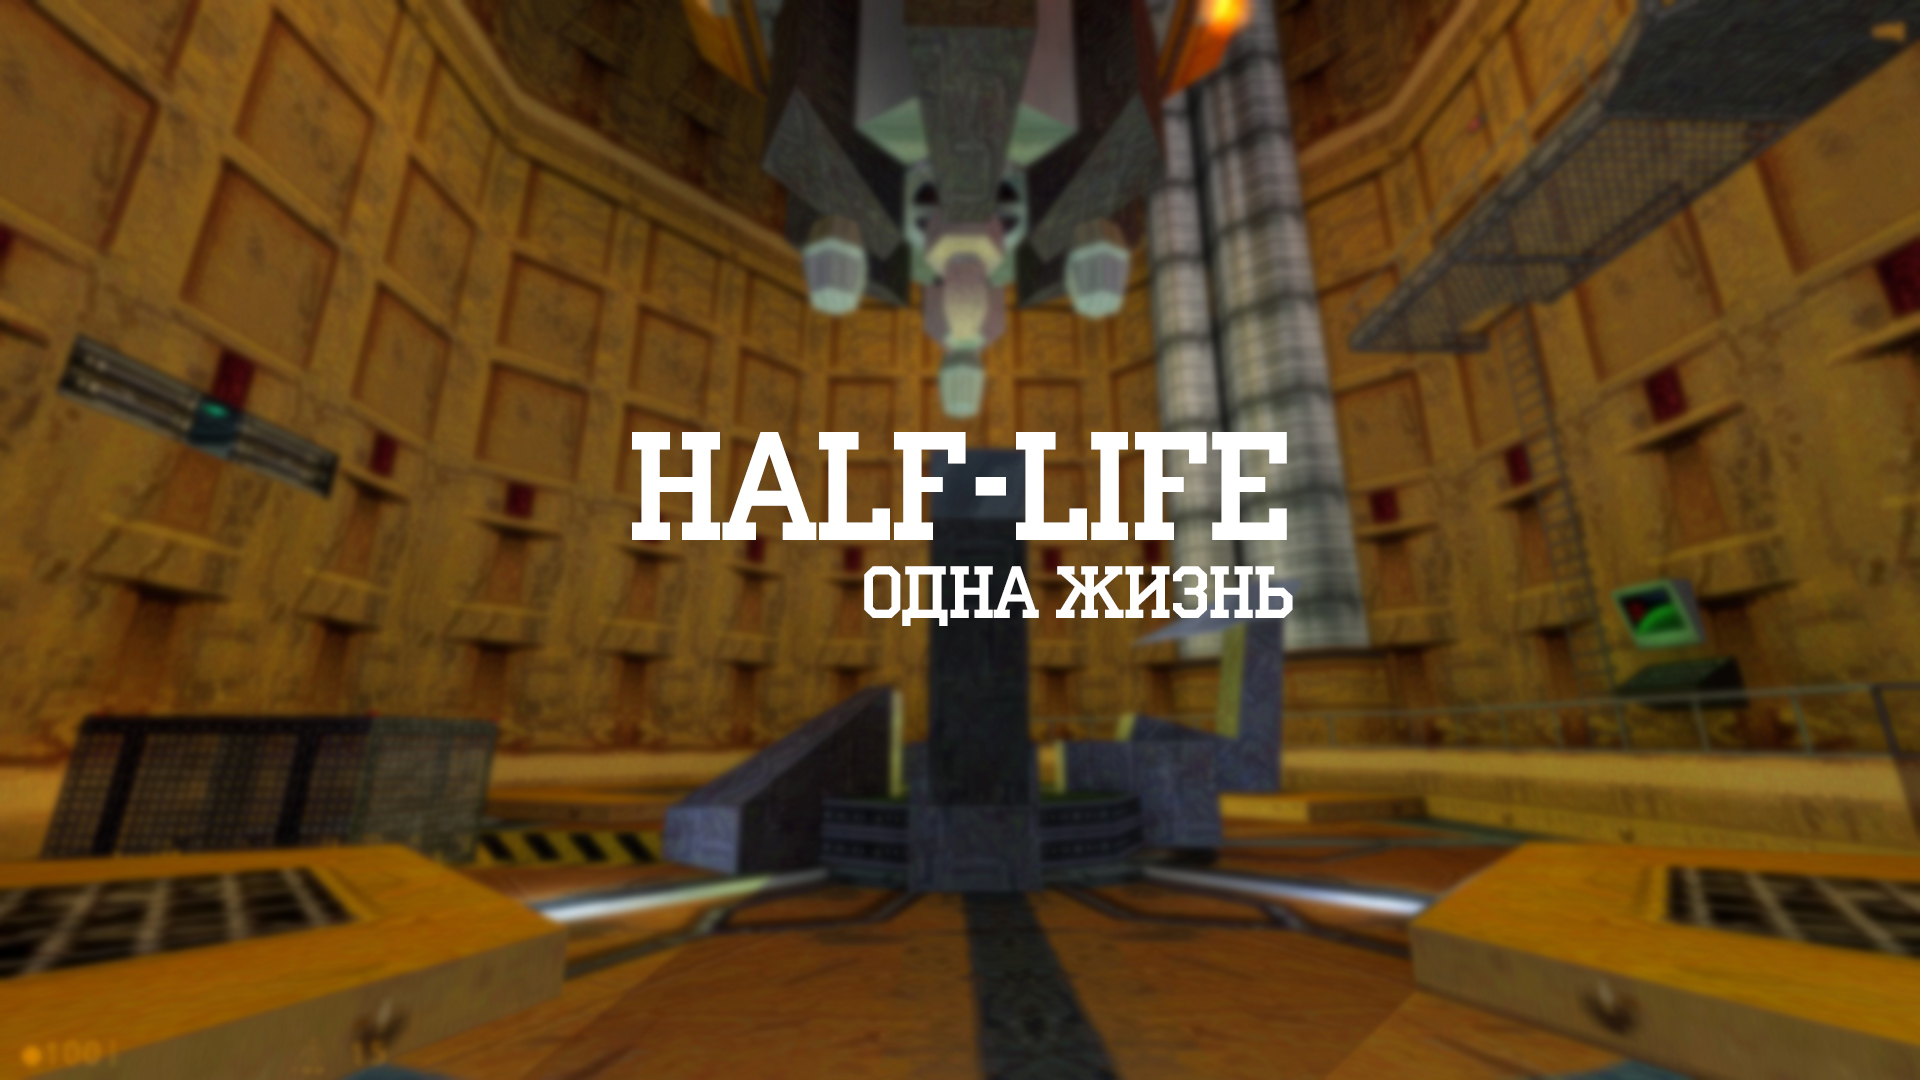 Download failed because you may not have purchased this app half life фото 56